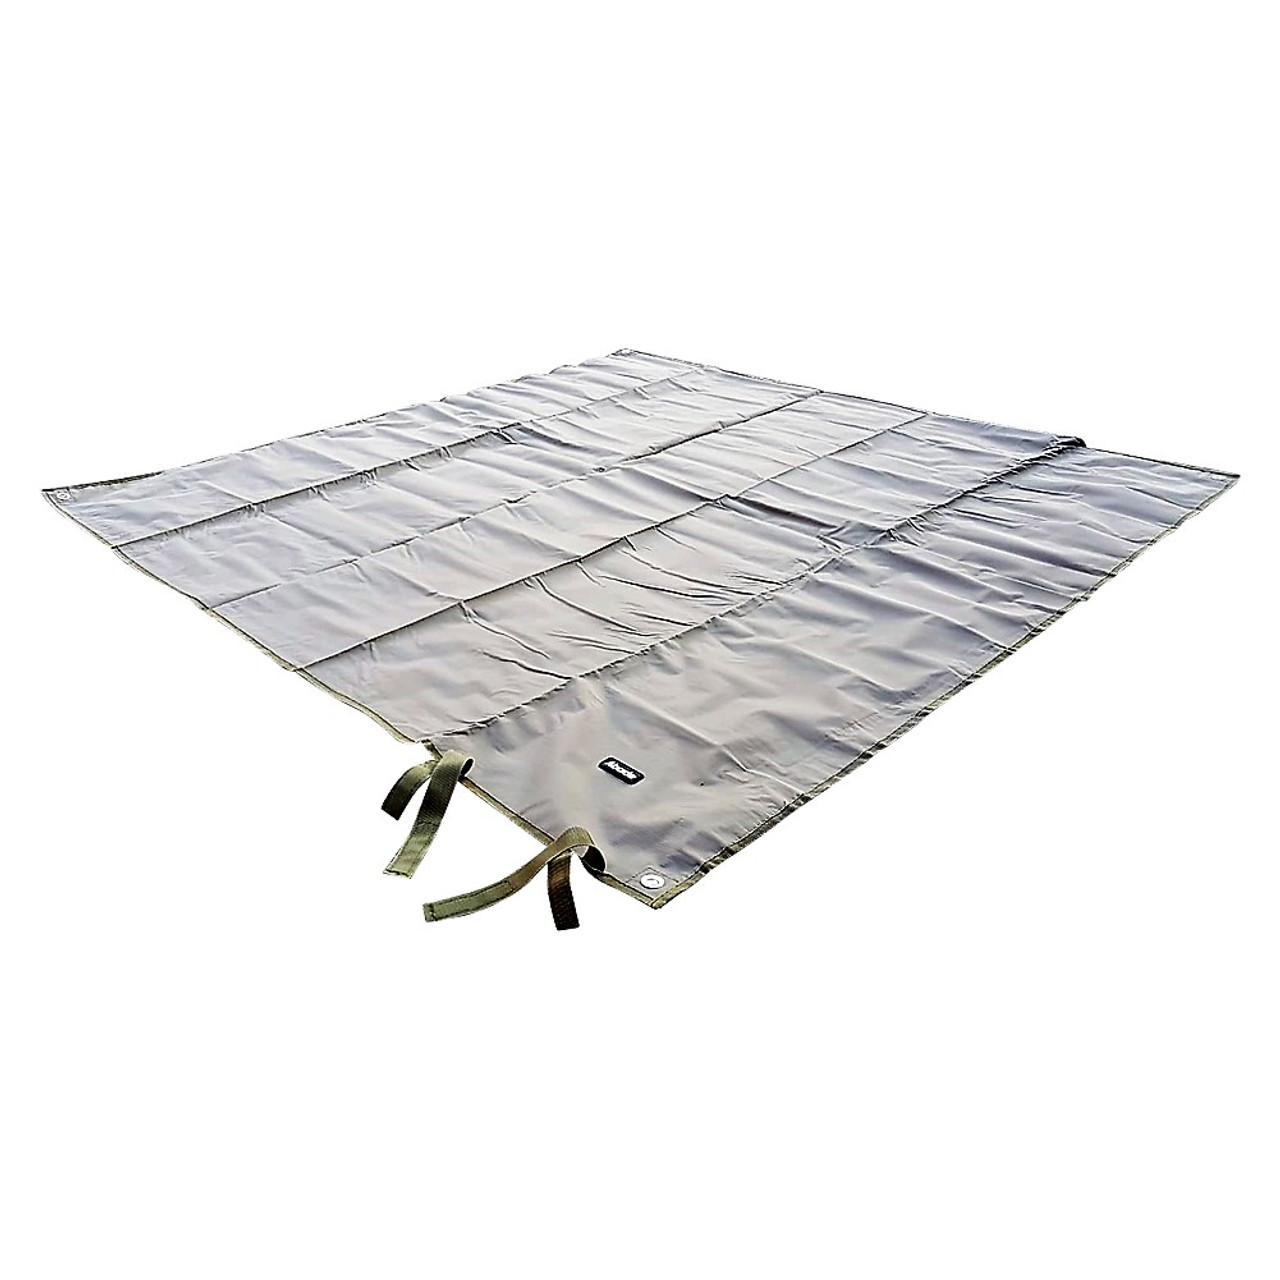 Abode Carp Fishing, Camping, Bedchair, Bed, Chair, Bivvy, Footpath,  Groundsheet Large - KOALA PRODUCTS FISHING TACKLE